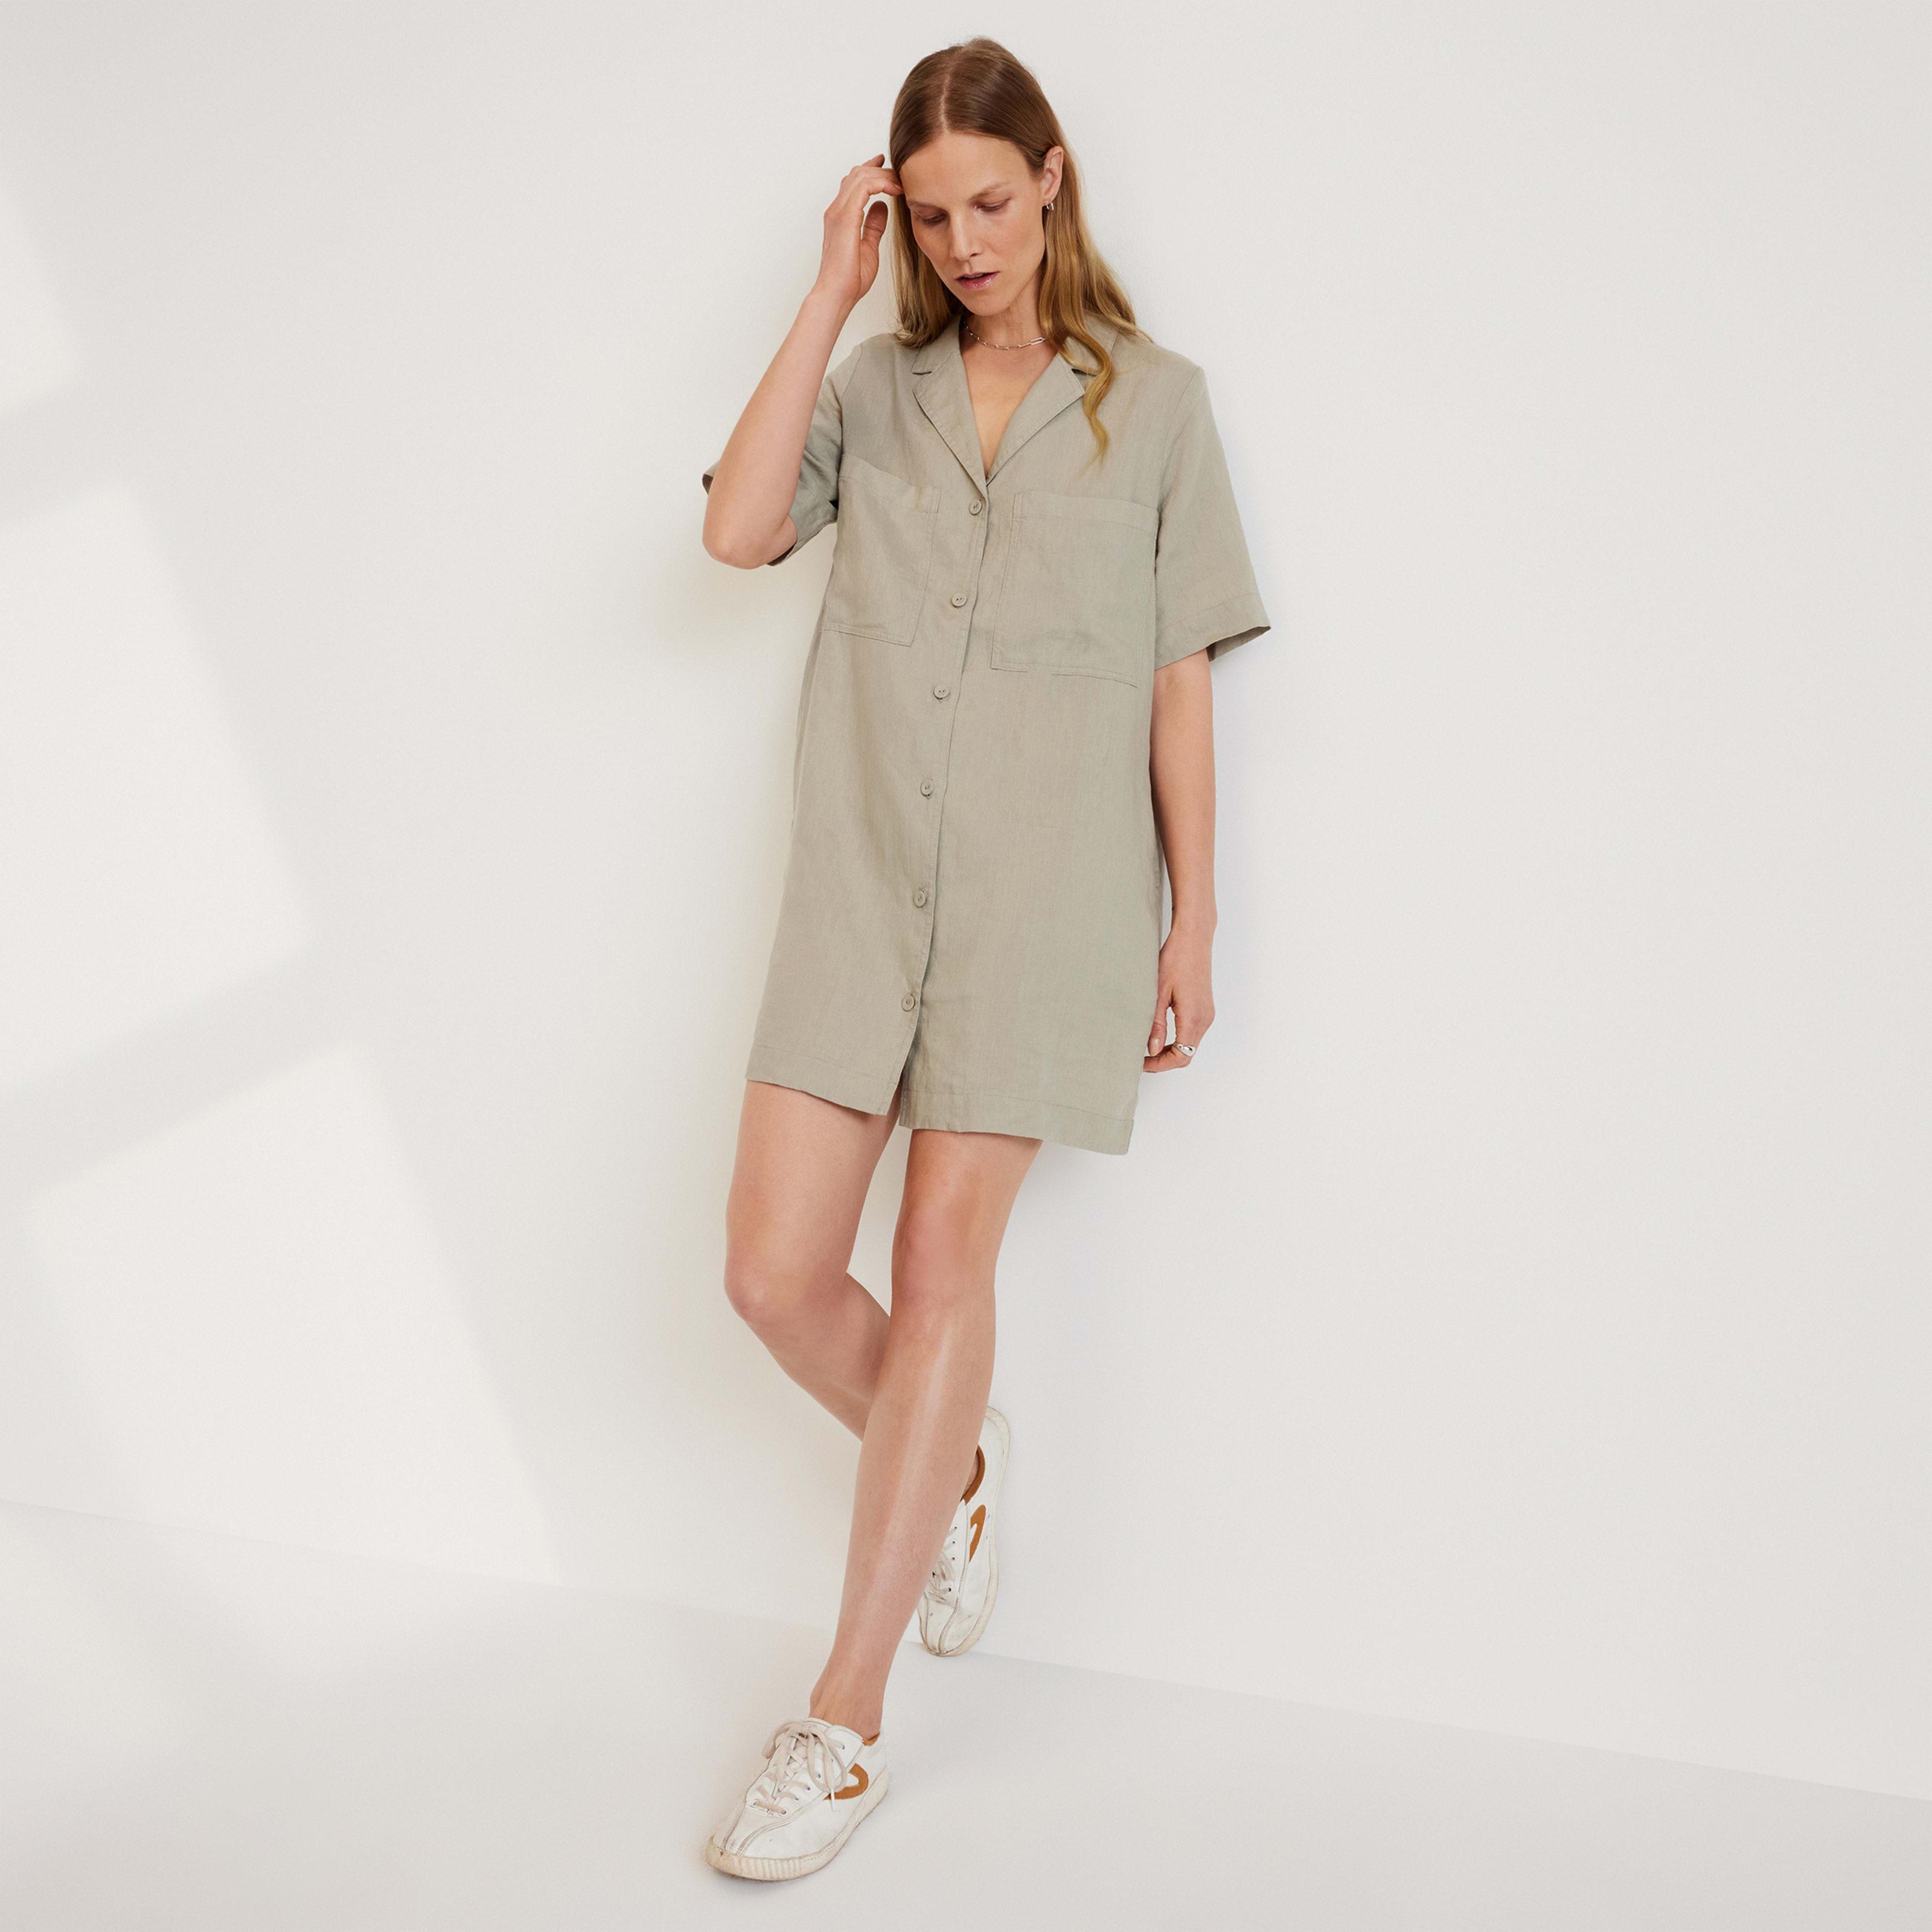 Womens Linen Workwear Dress by Everlane Product Image